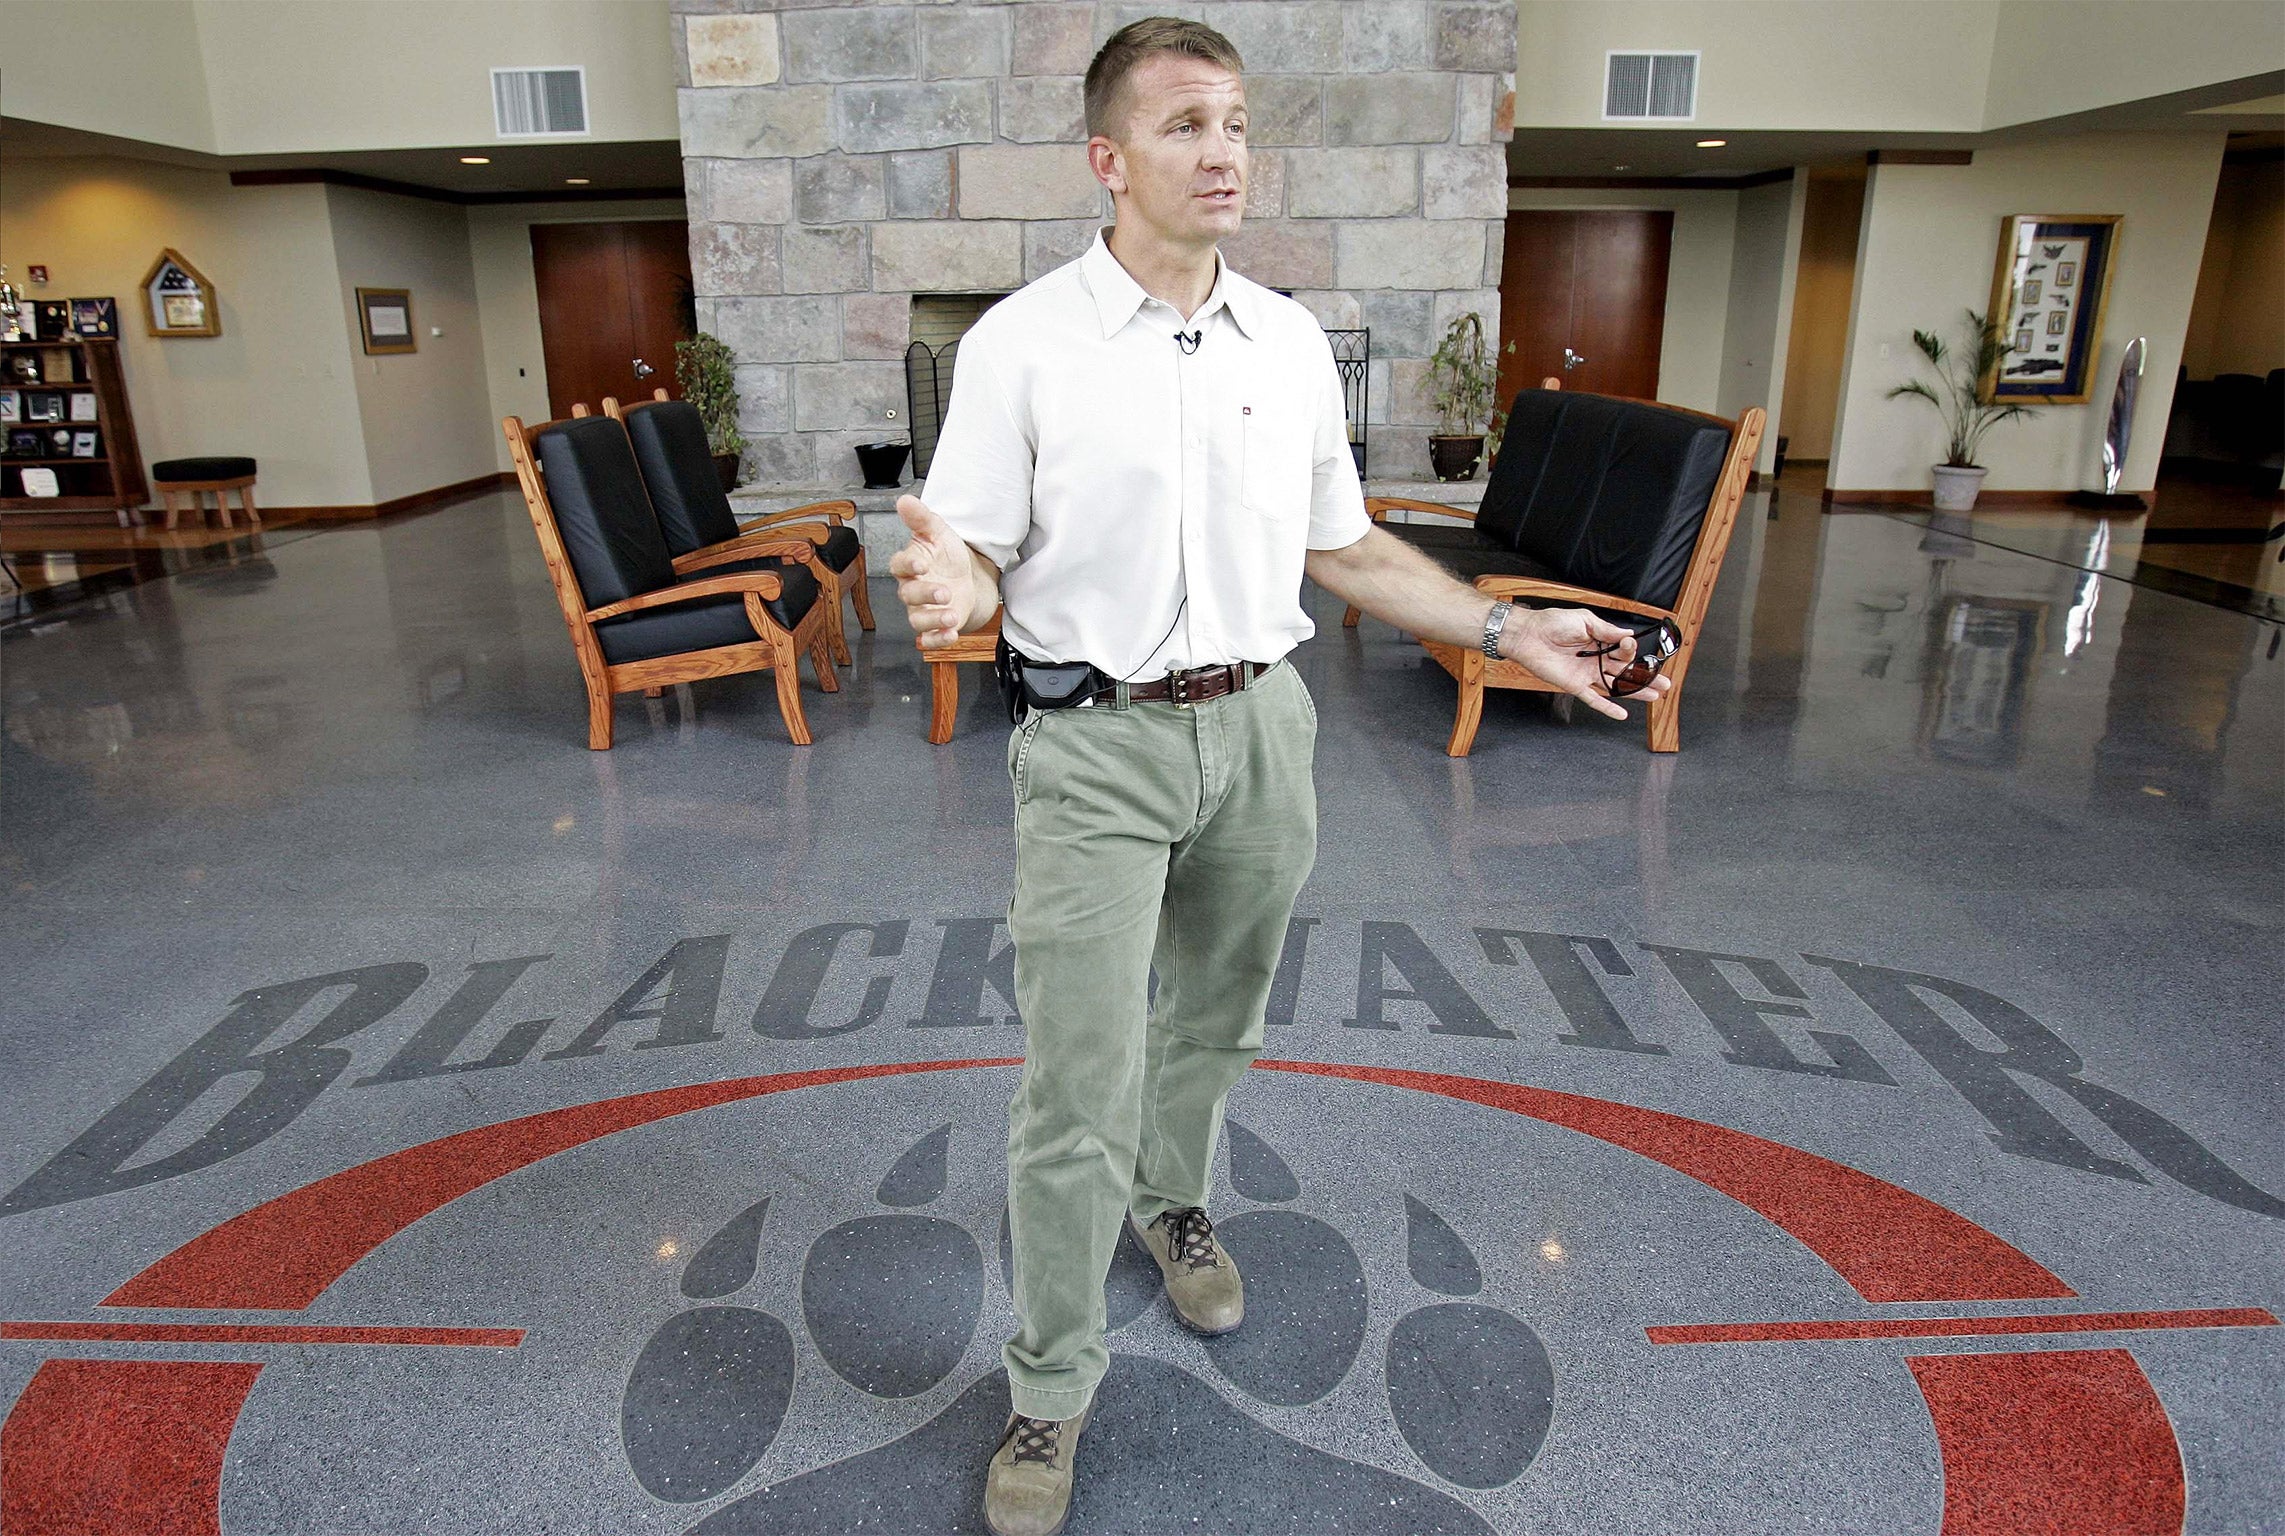 The security firm Blackwater was set up by a former US Navy Seal, Erik Prince, who had links to George W Bush’s administration. Mr Prince, pictured, sold his stake in the firm in 2010, blaming ‘politics’ in Washington